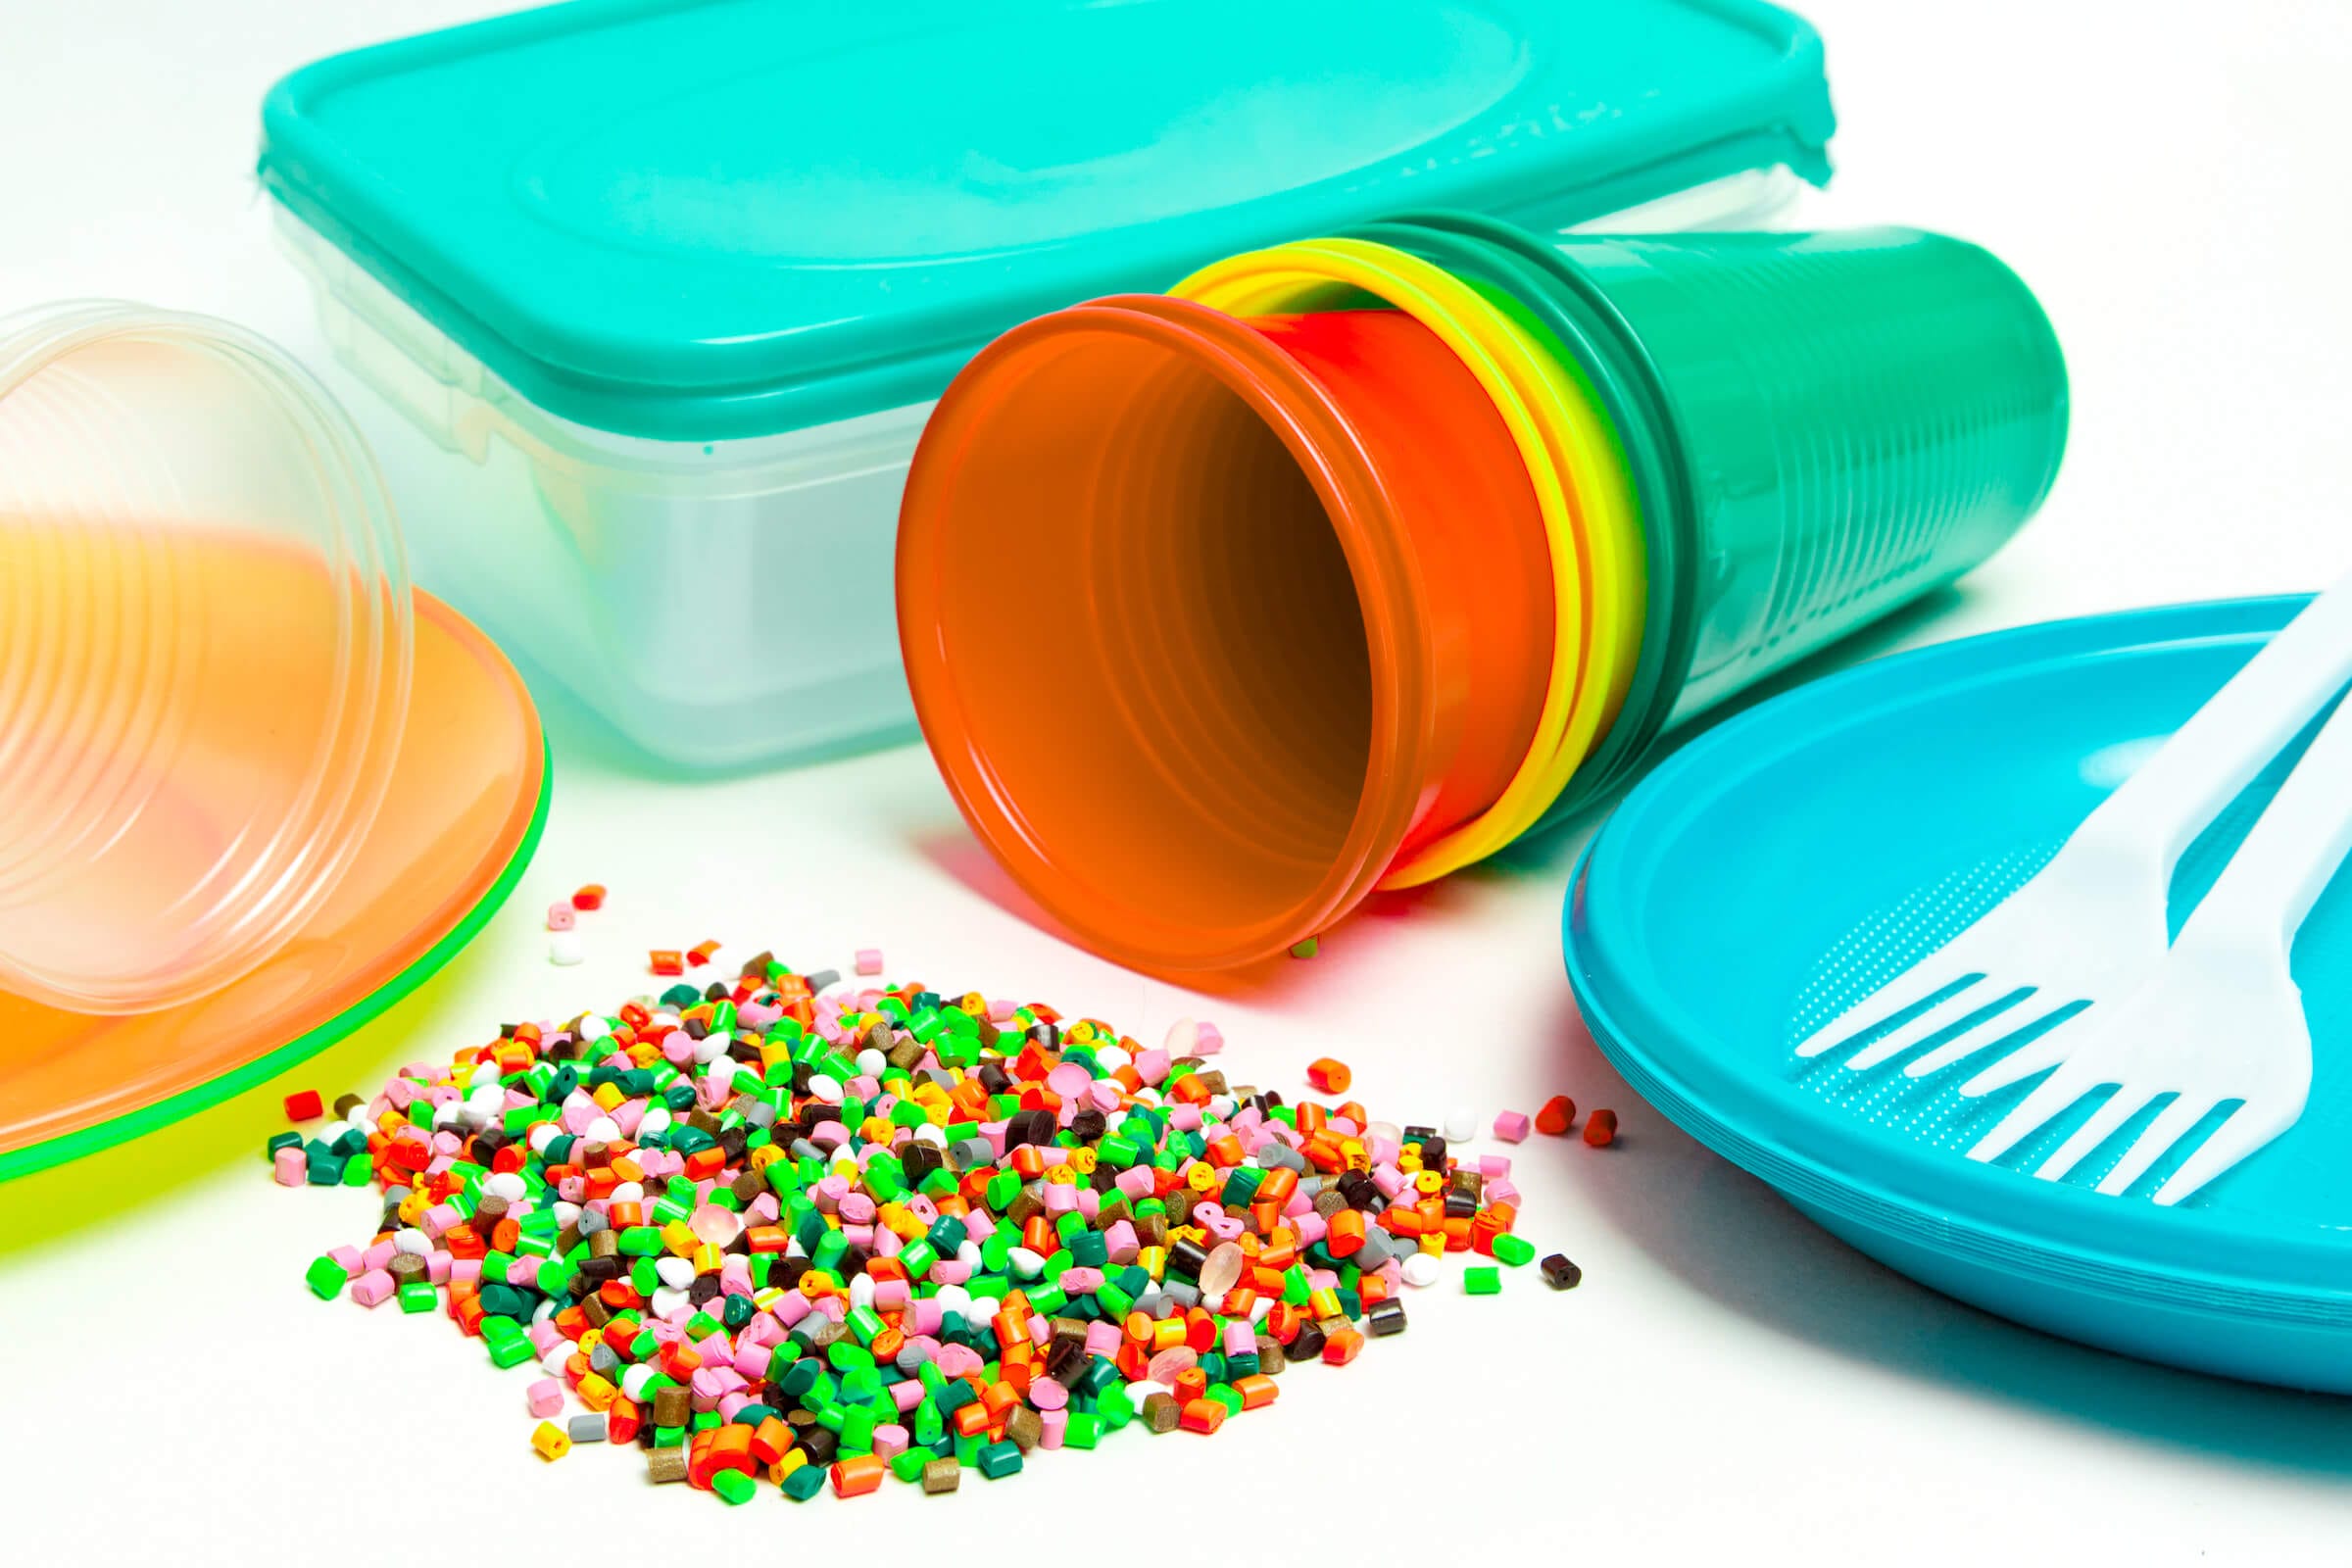 A photo of plastic products that contain toxic chemicals.